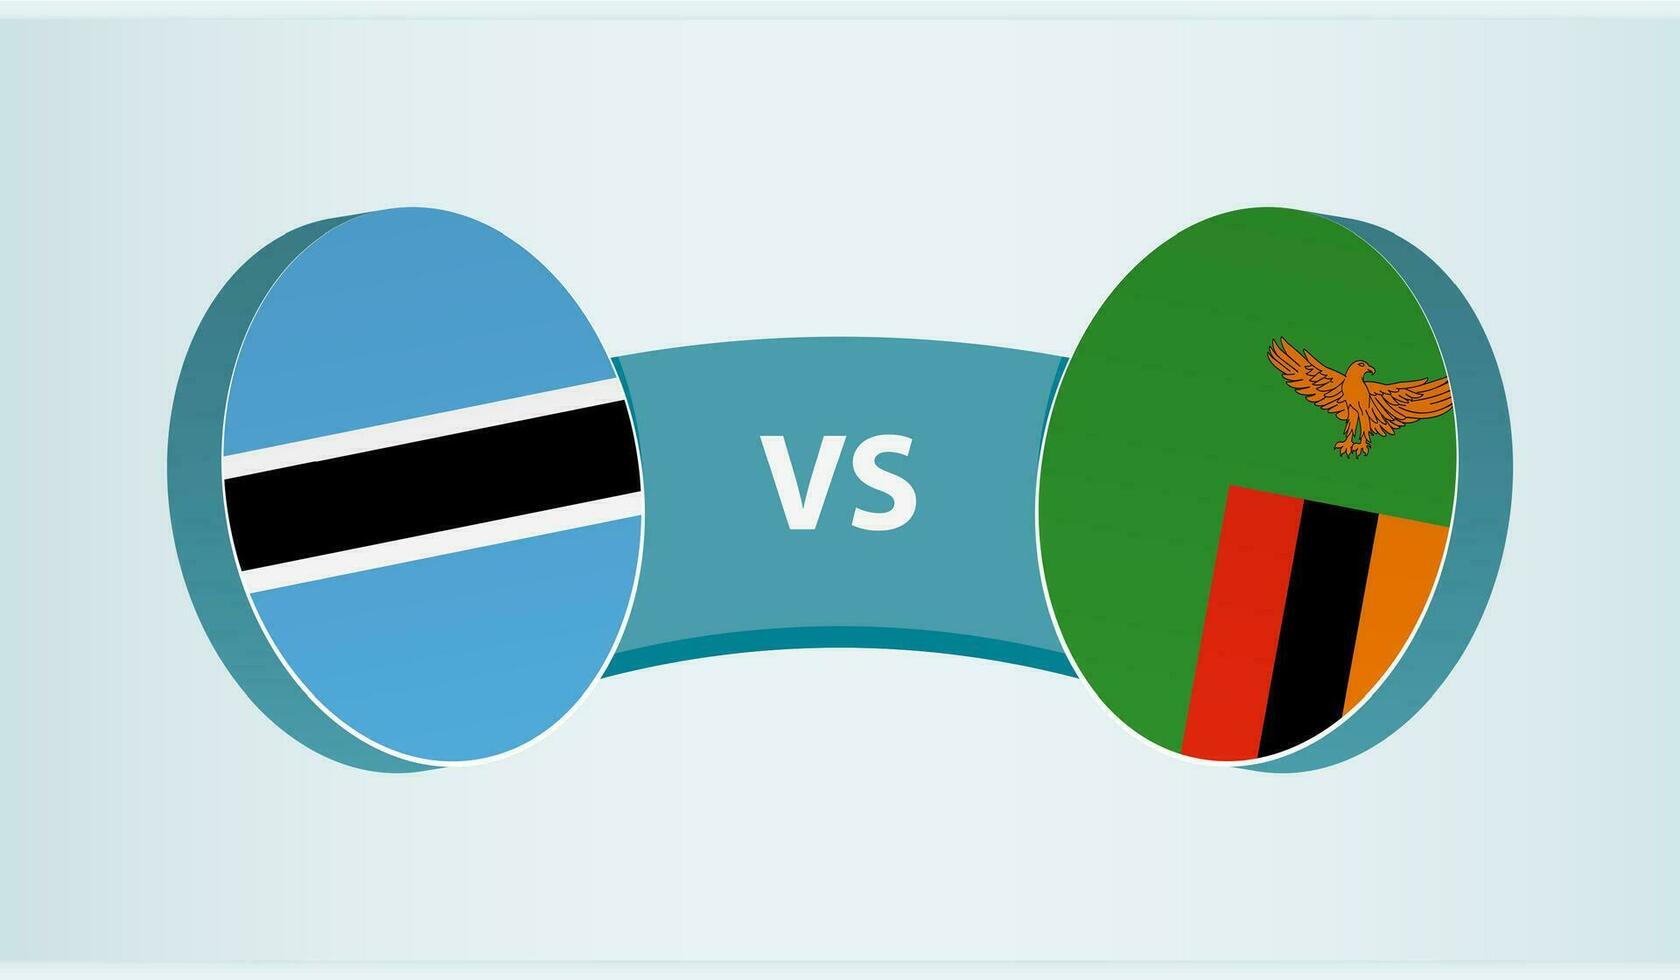 Botswana versus Zambia, team sports competition concept. vector